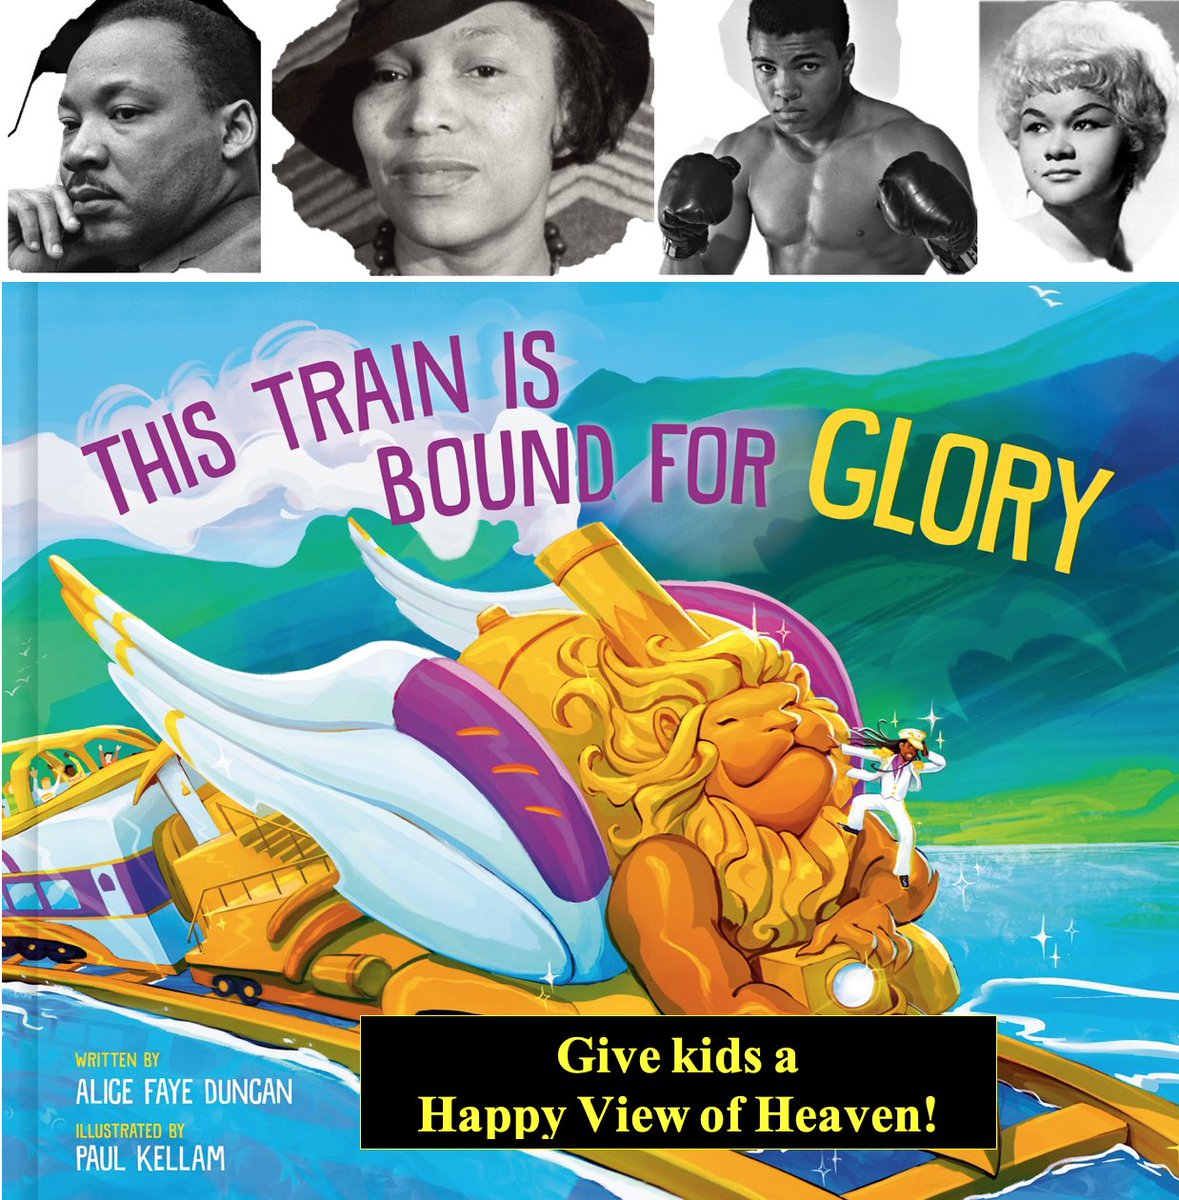 Kids experience death! Family, friends, history makers, and pets die. Give kids a joyful view of Heaven with THIS TRAIN IS BOUND FOR GLORY! All Aboard! ---> bit.ly/3lGAkfa